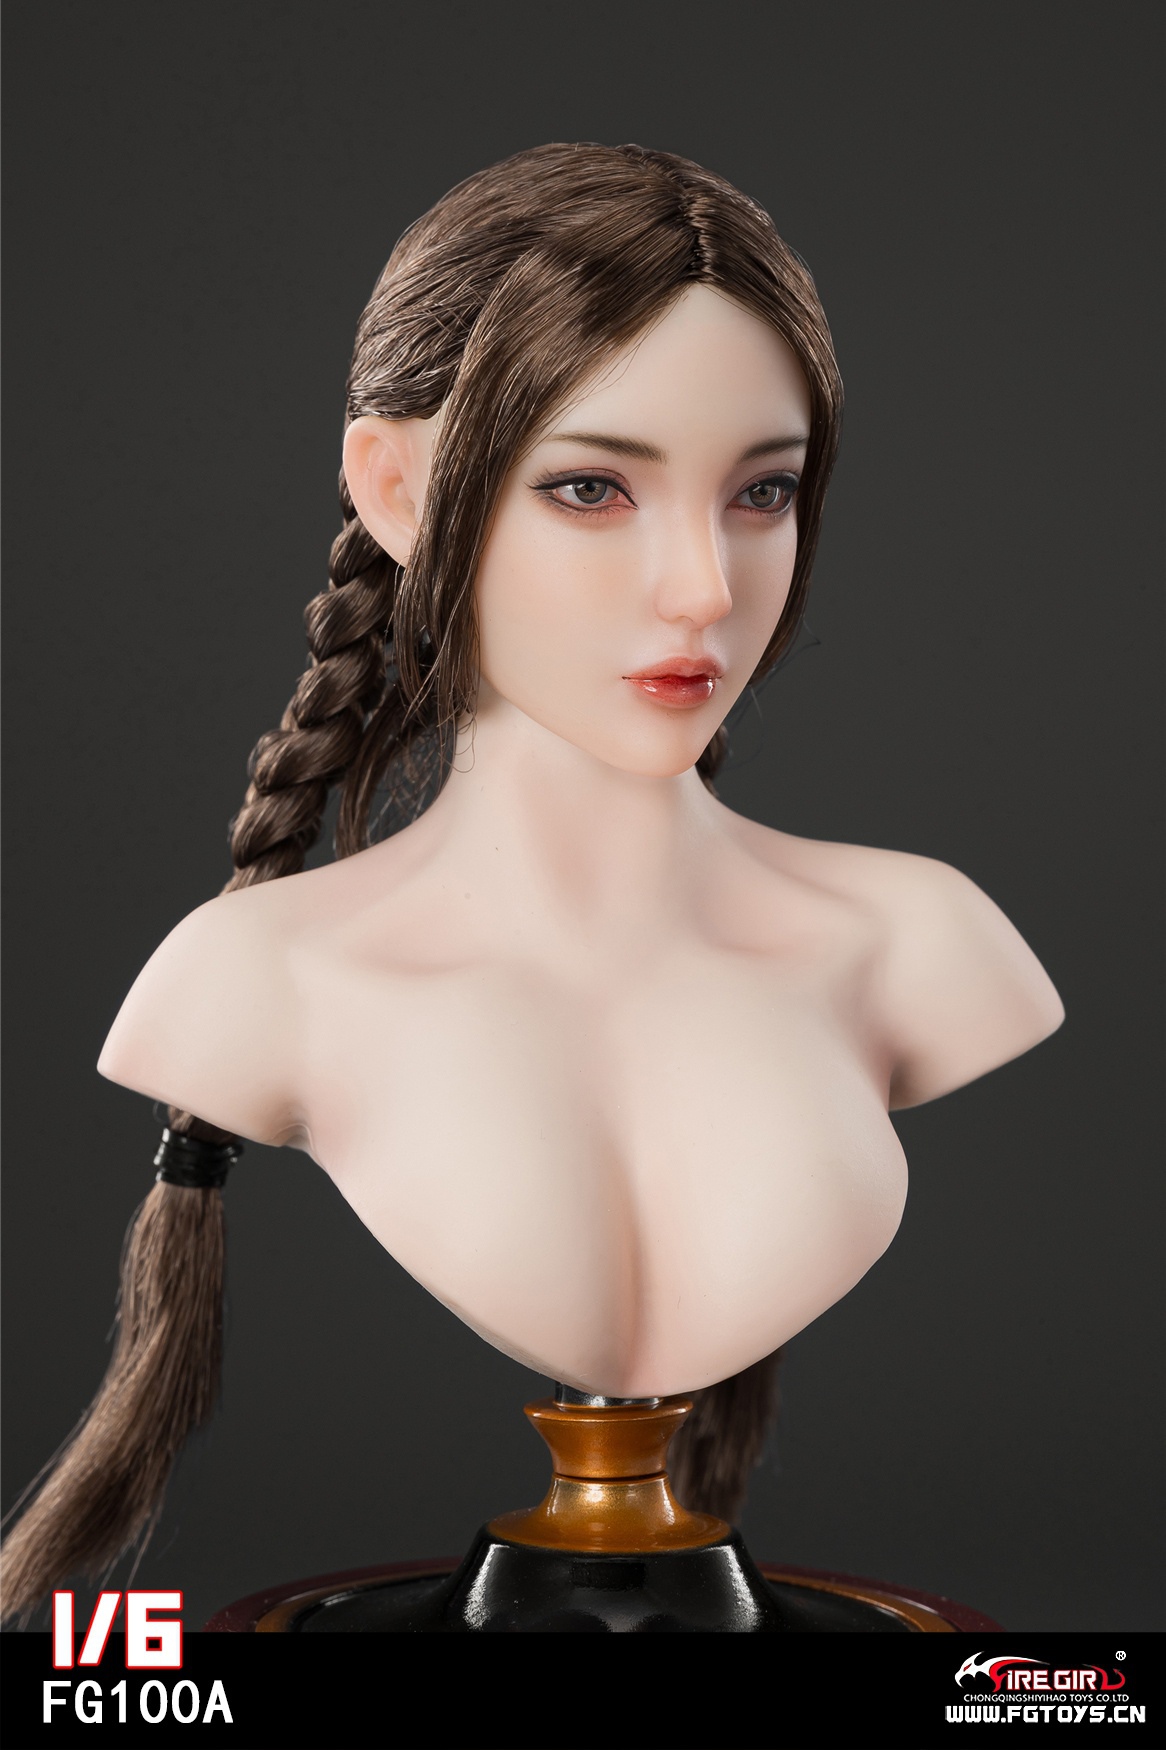 MovableEyes - NEW PRODUCT: Fire Girl Toys: Western Girl-Aisha [movable eyes, ABC three hairstyles] (#FG100)  3421